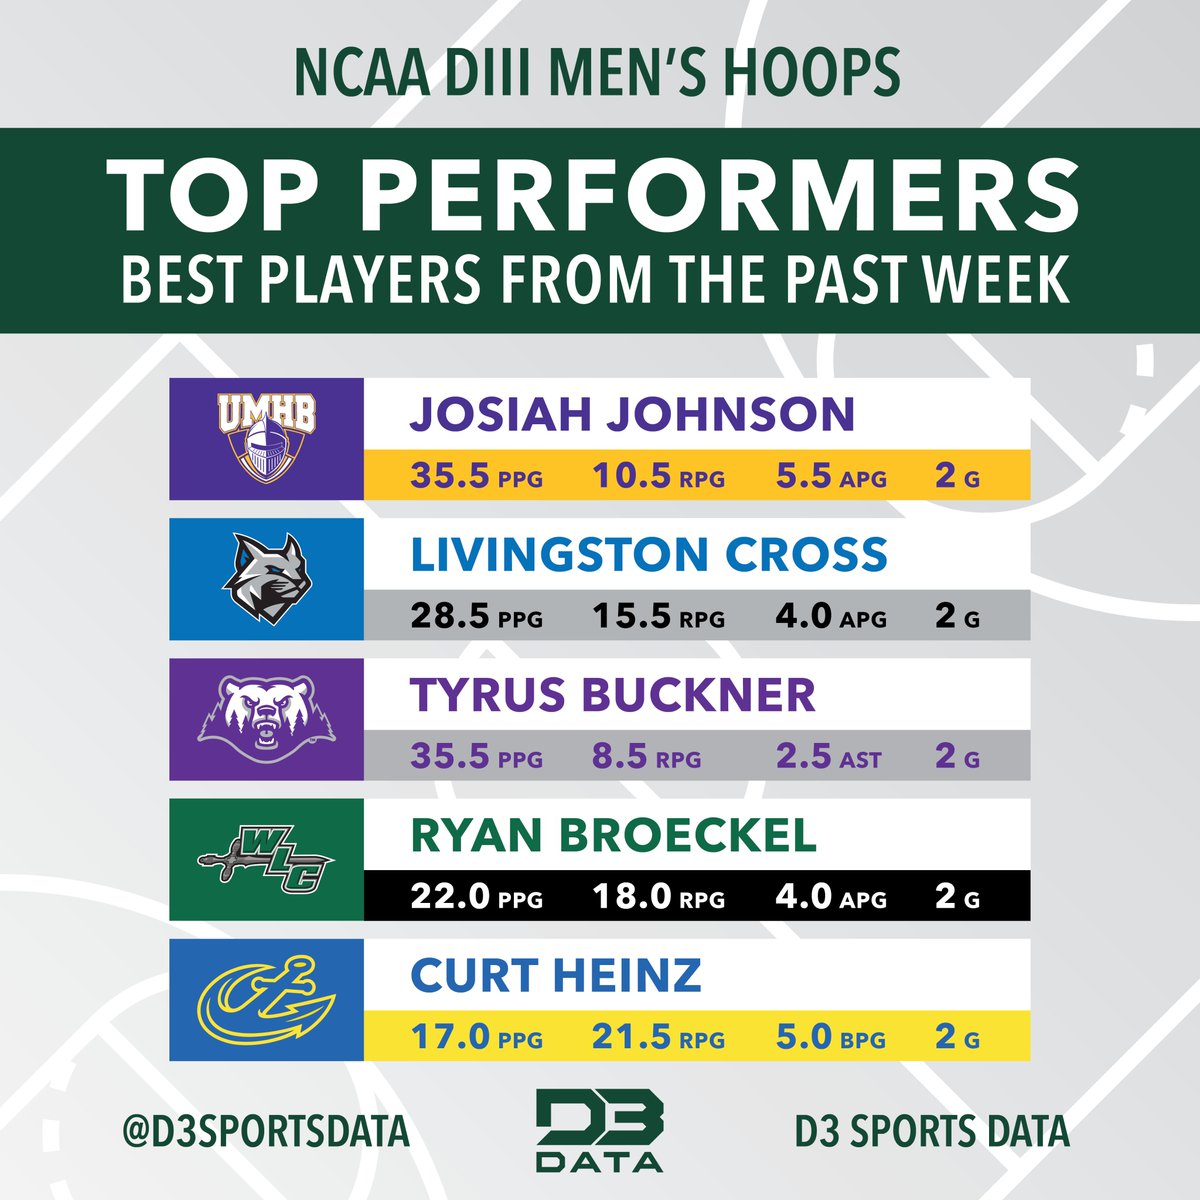 Top players from week 14 of the DIII Men's Hoops season. #d3data #d3 #d3sports #d3hoops